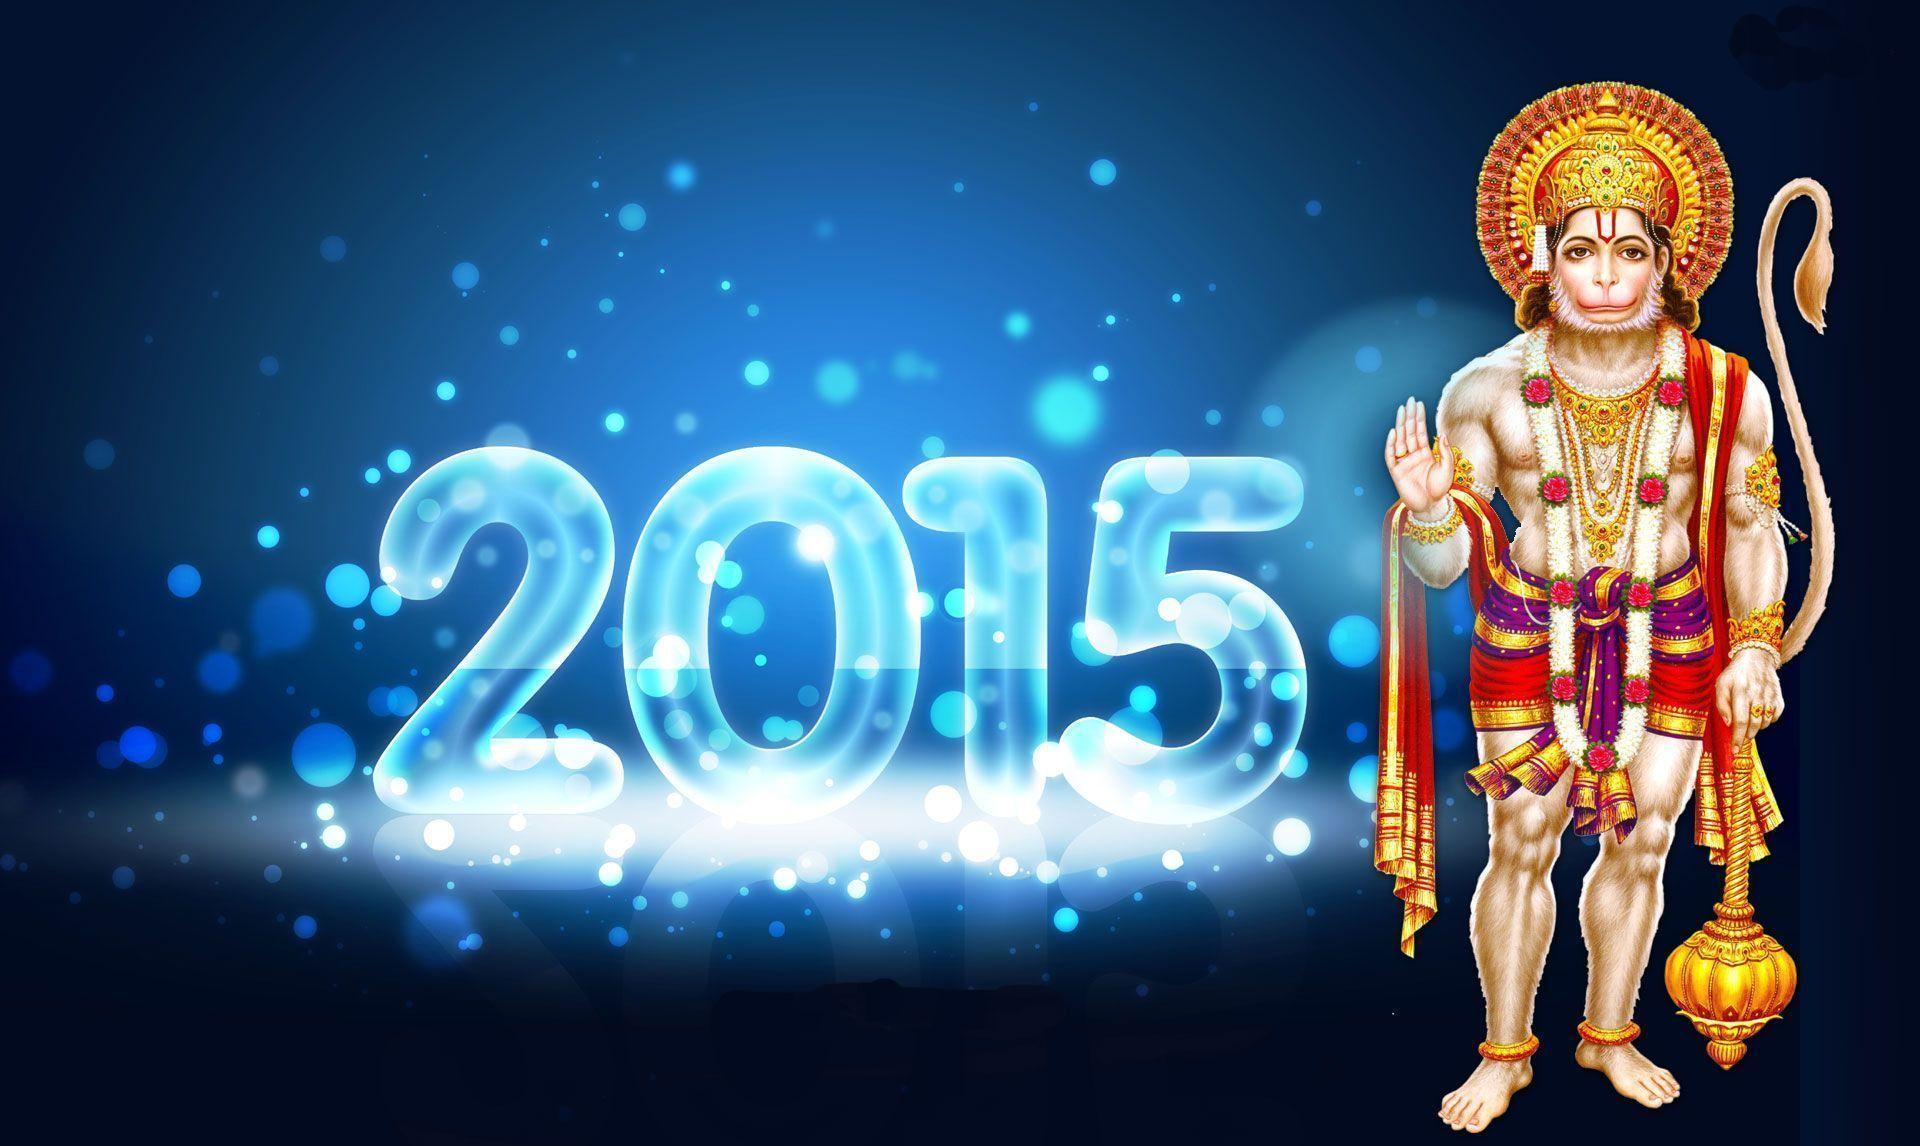 Happy New Year 2015 Wallpaper. Happy New Year Picture. Cool